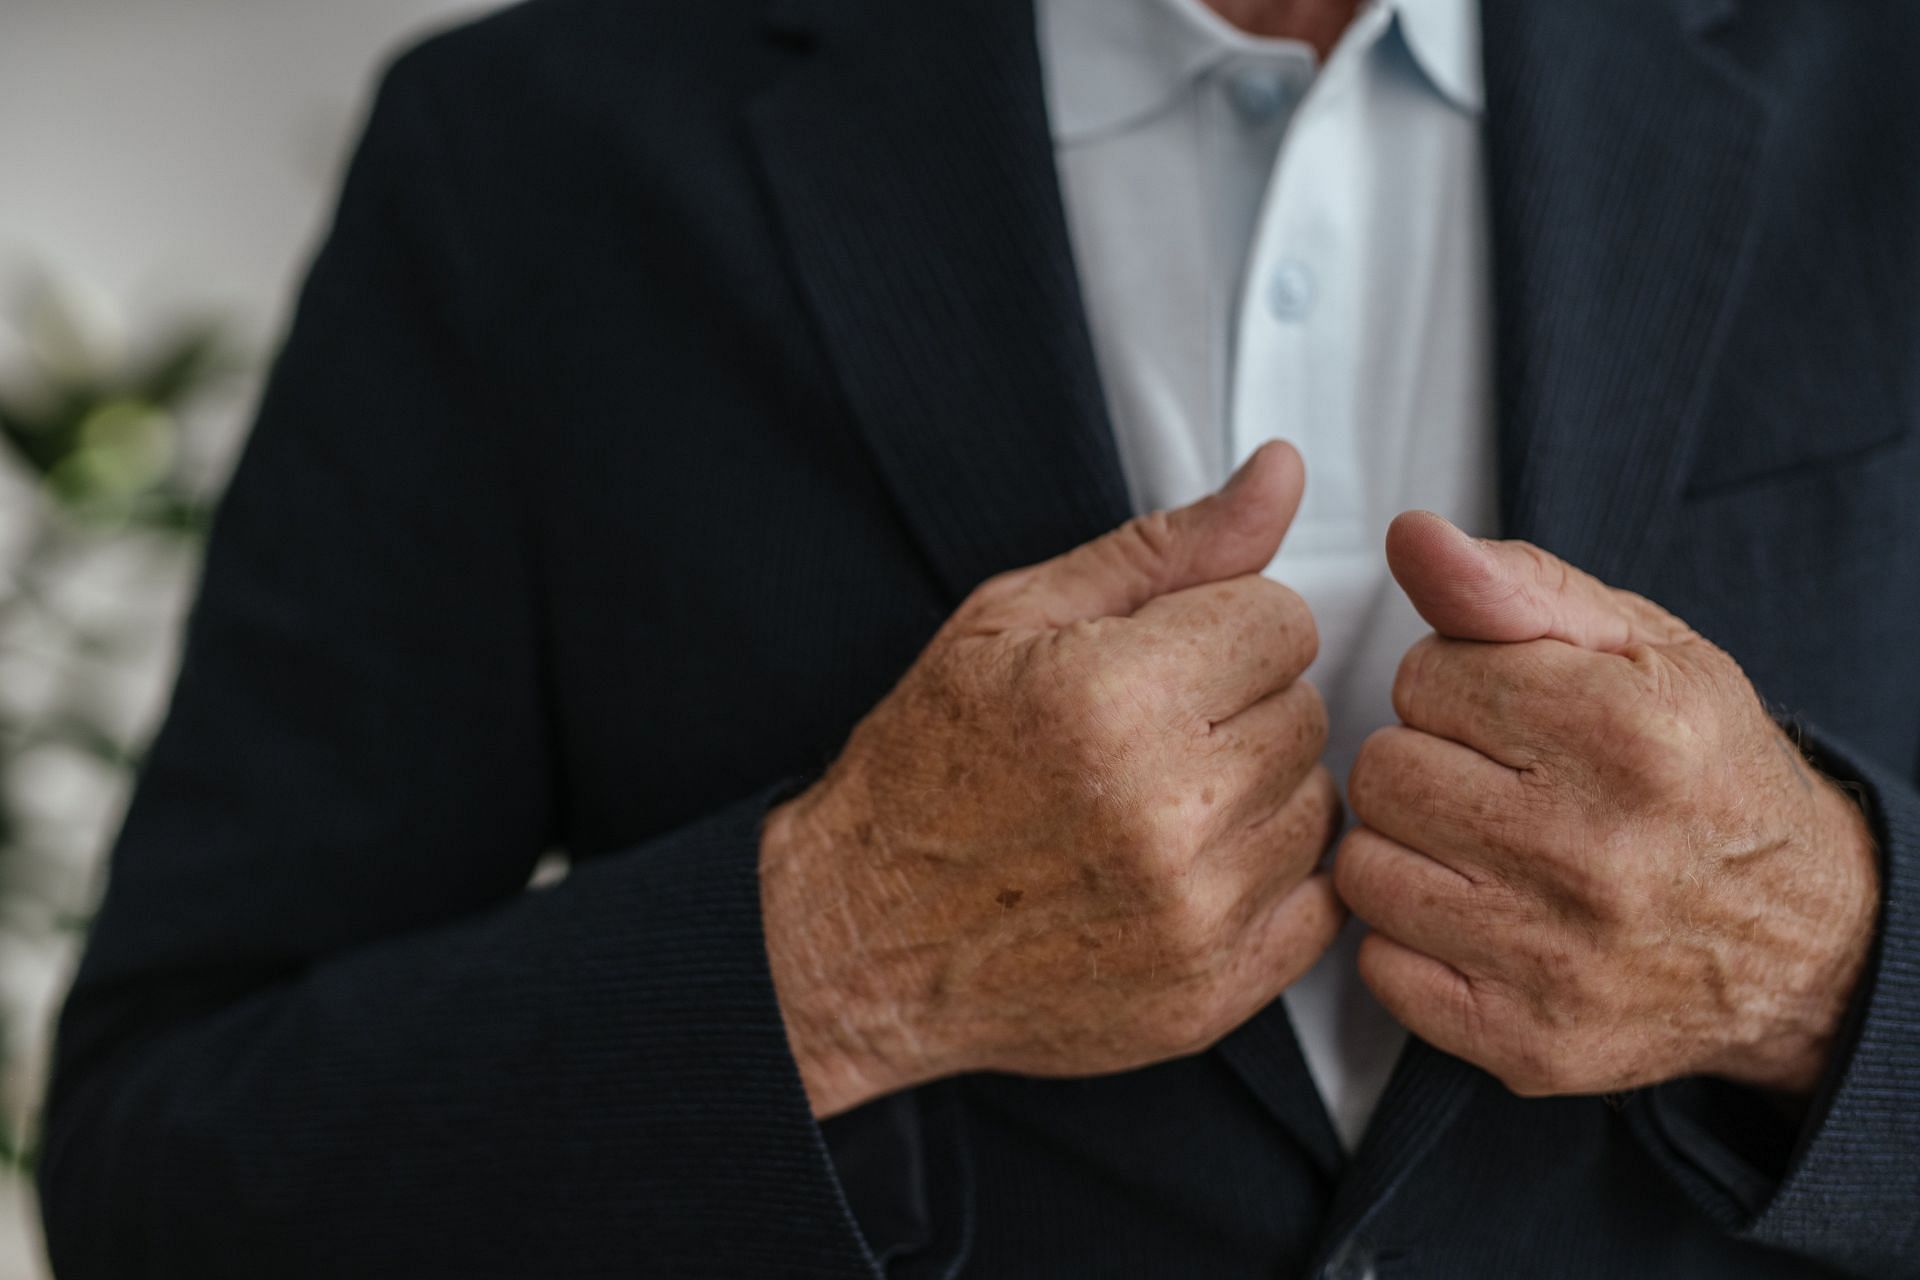 Trigger finger can cause limited hand mobility (Image via Pexels/Shvets Production)